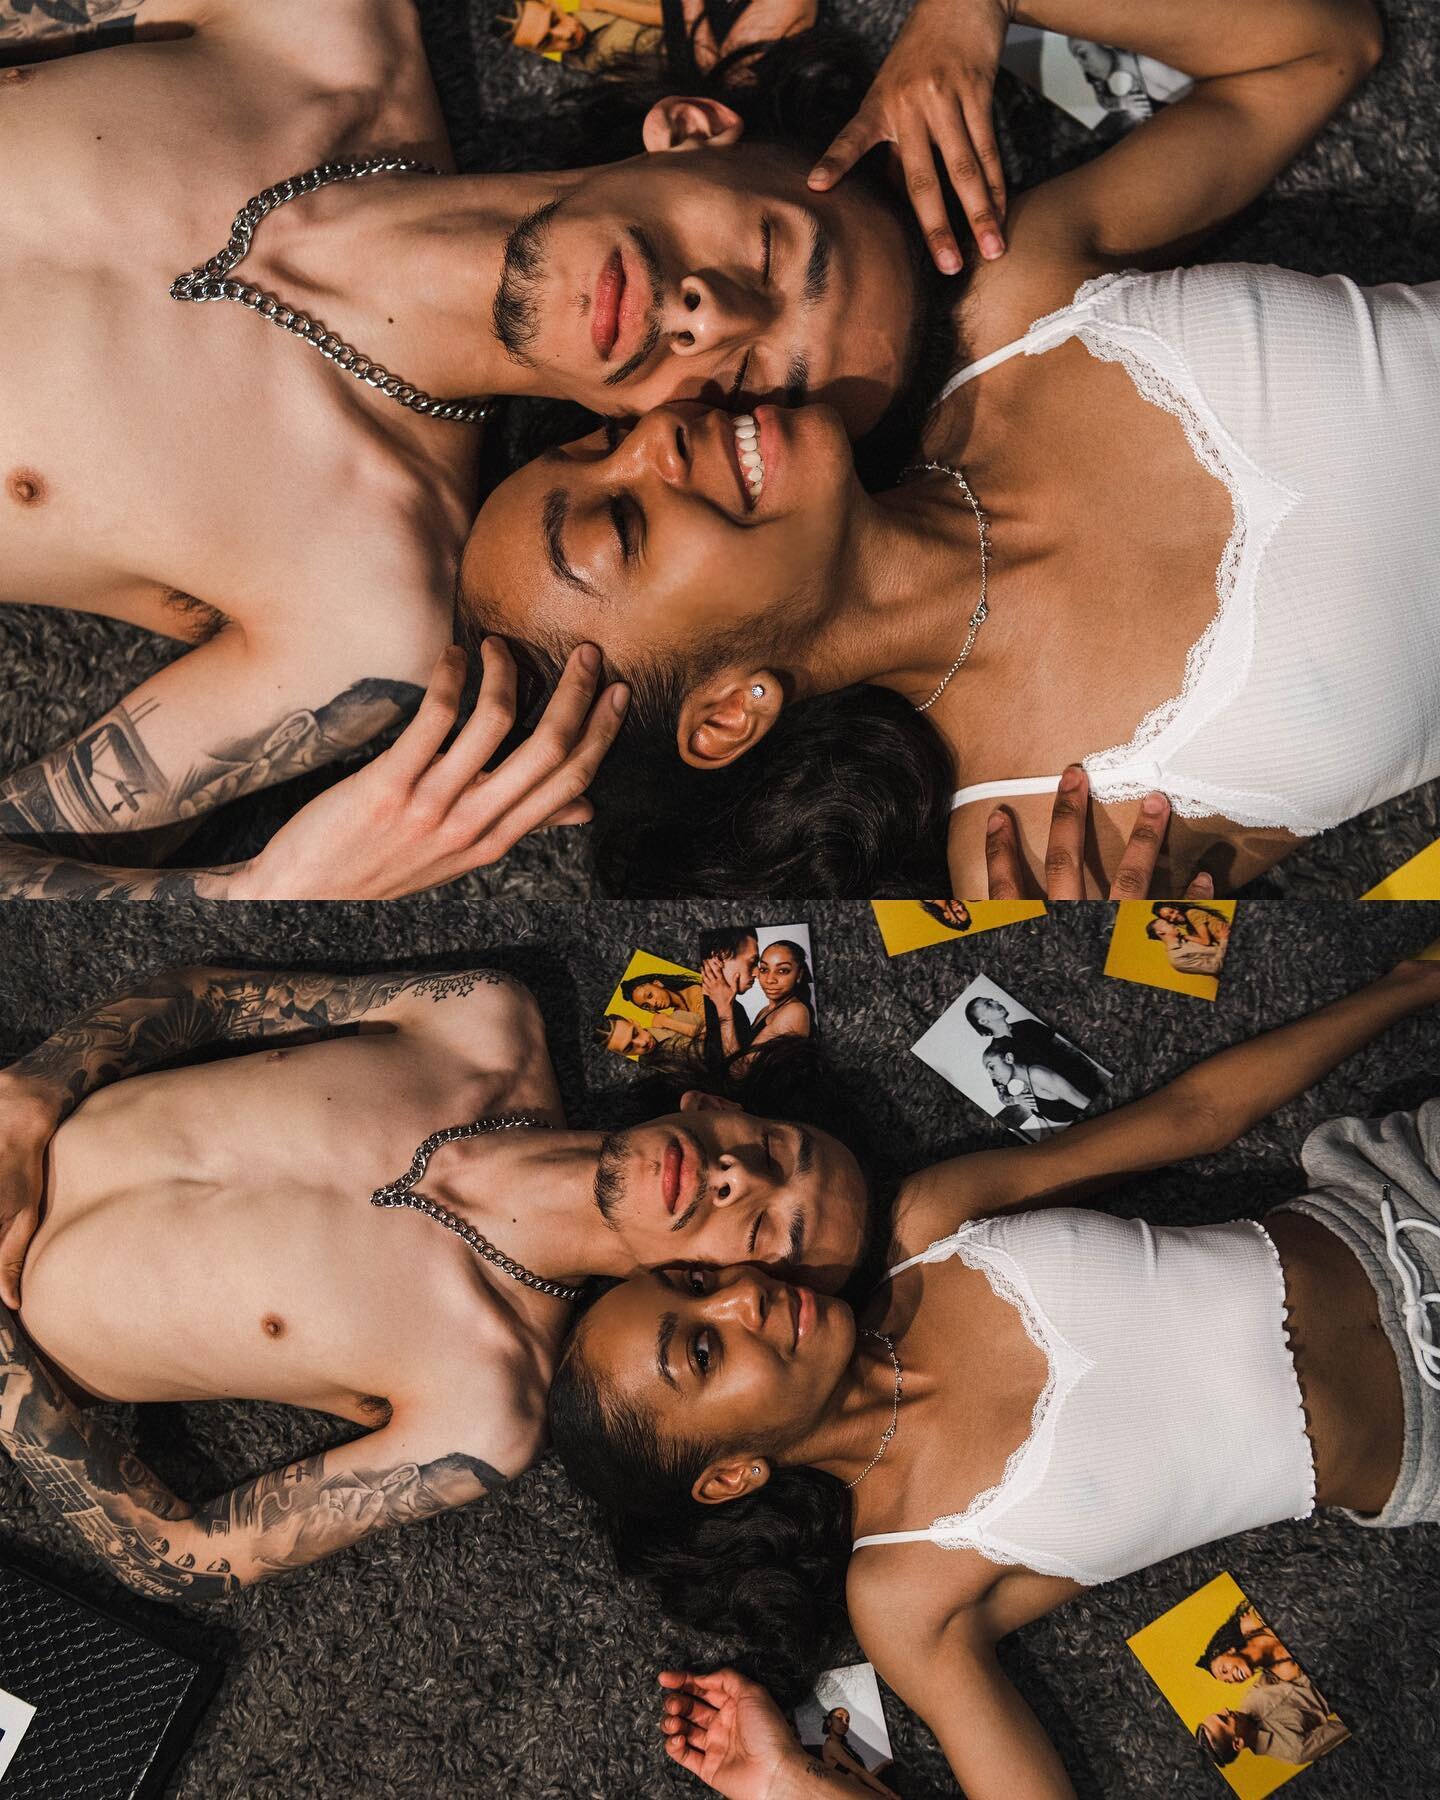 Forever. More photos of @_kaivibe_ and I. 🖤